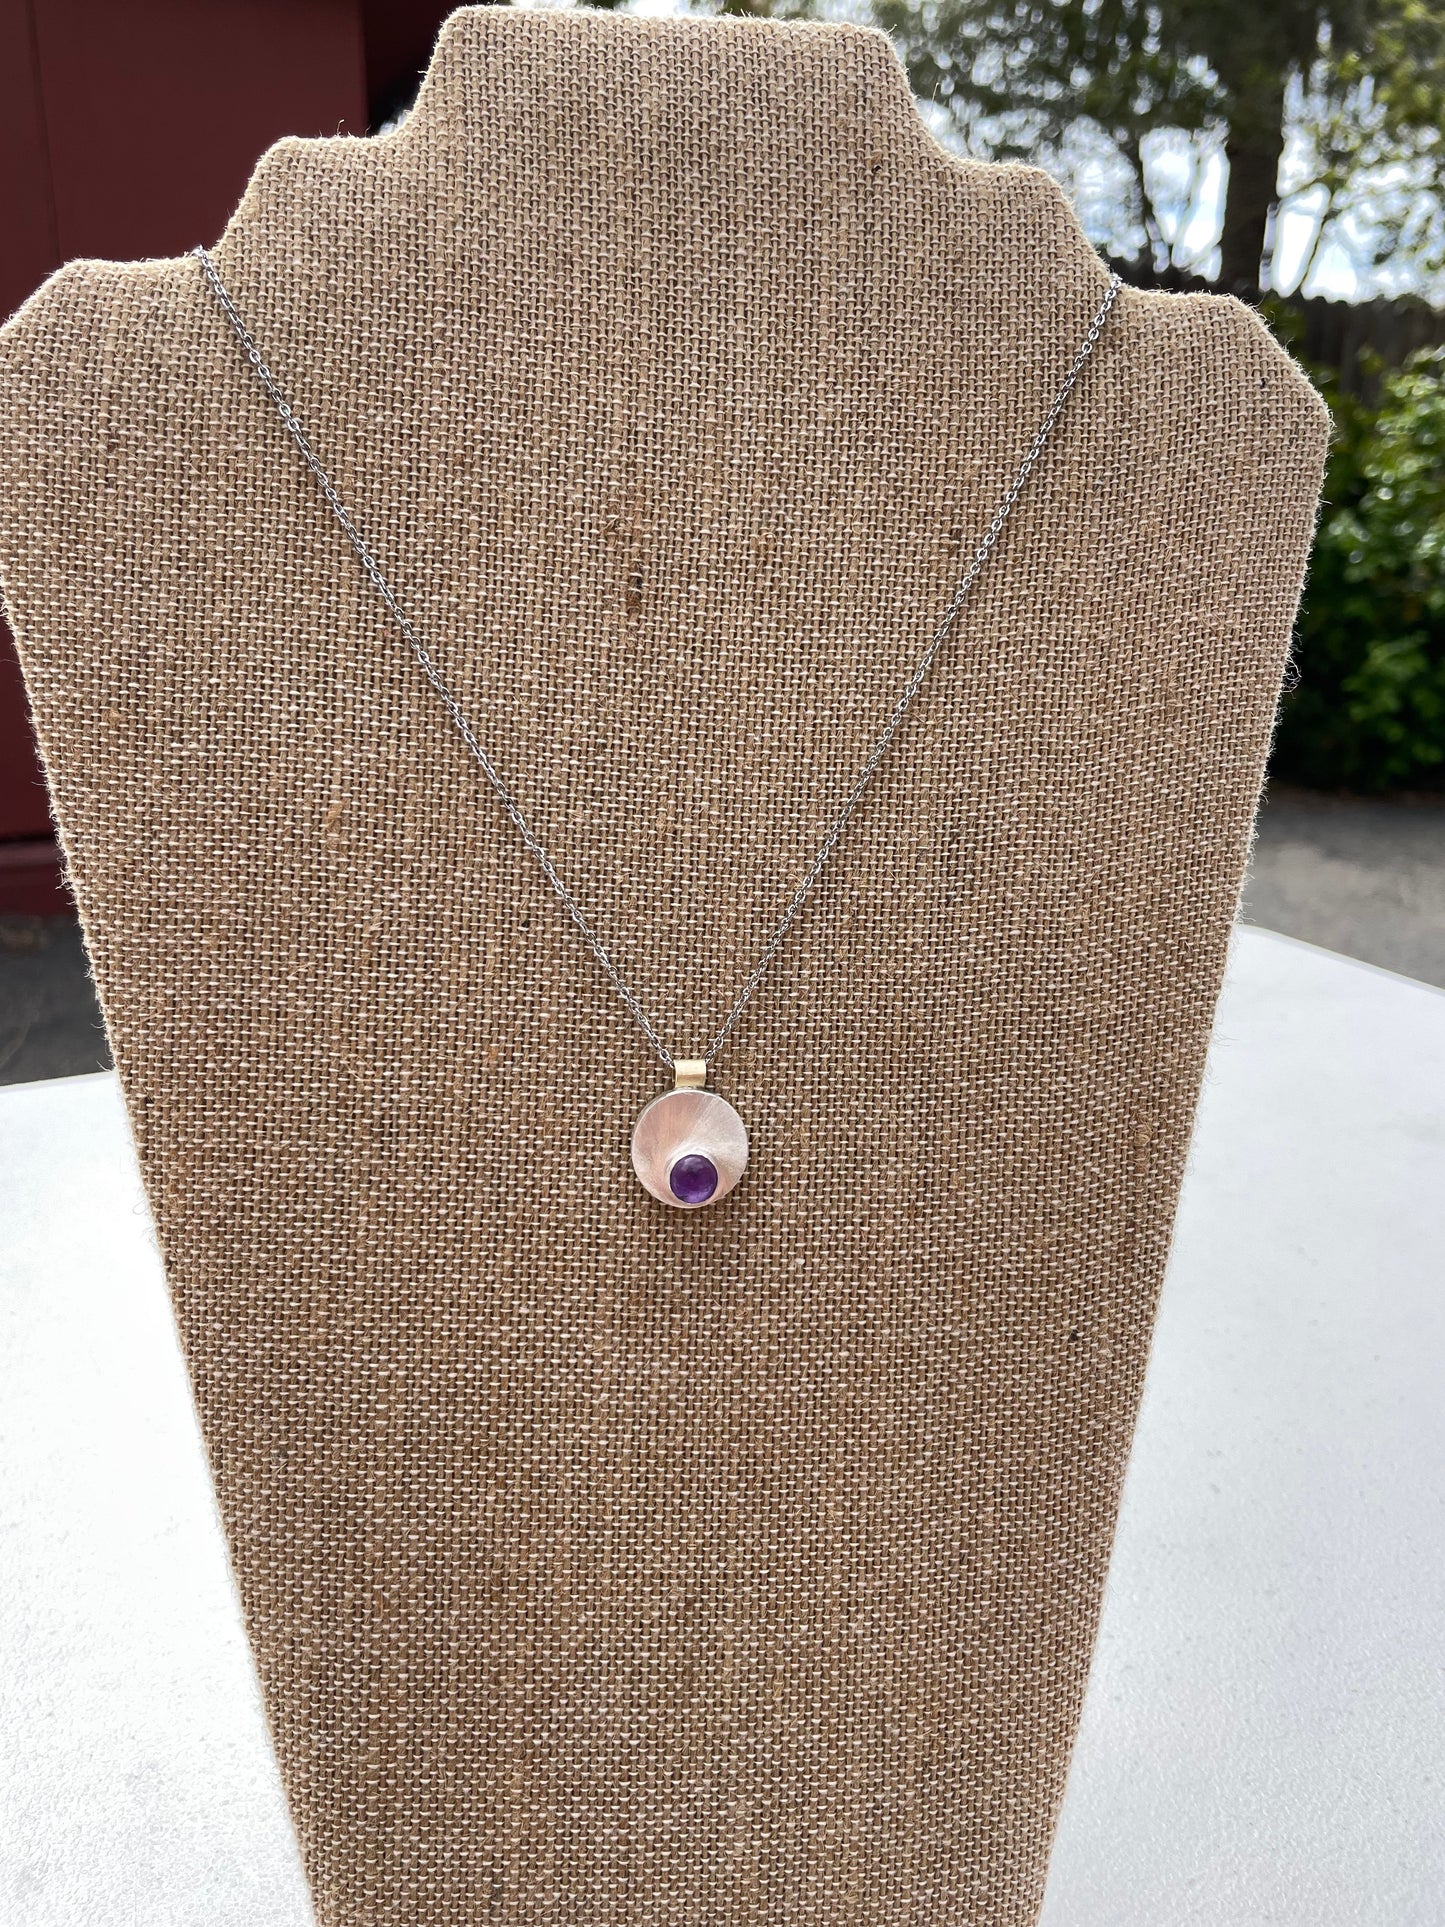 Sterling Silver Round Hollow Form Pendant Necklace, Amethyst, Opal, Turquoise, Brass, Circle Necklace Pendant, .925 Sterling Silver Pendant